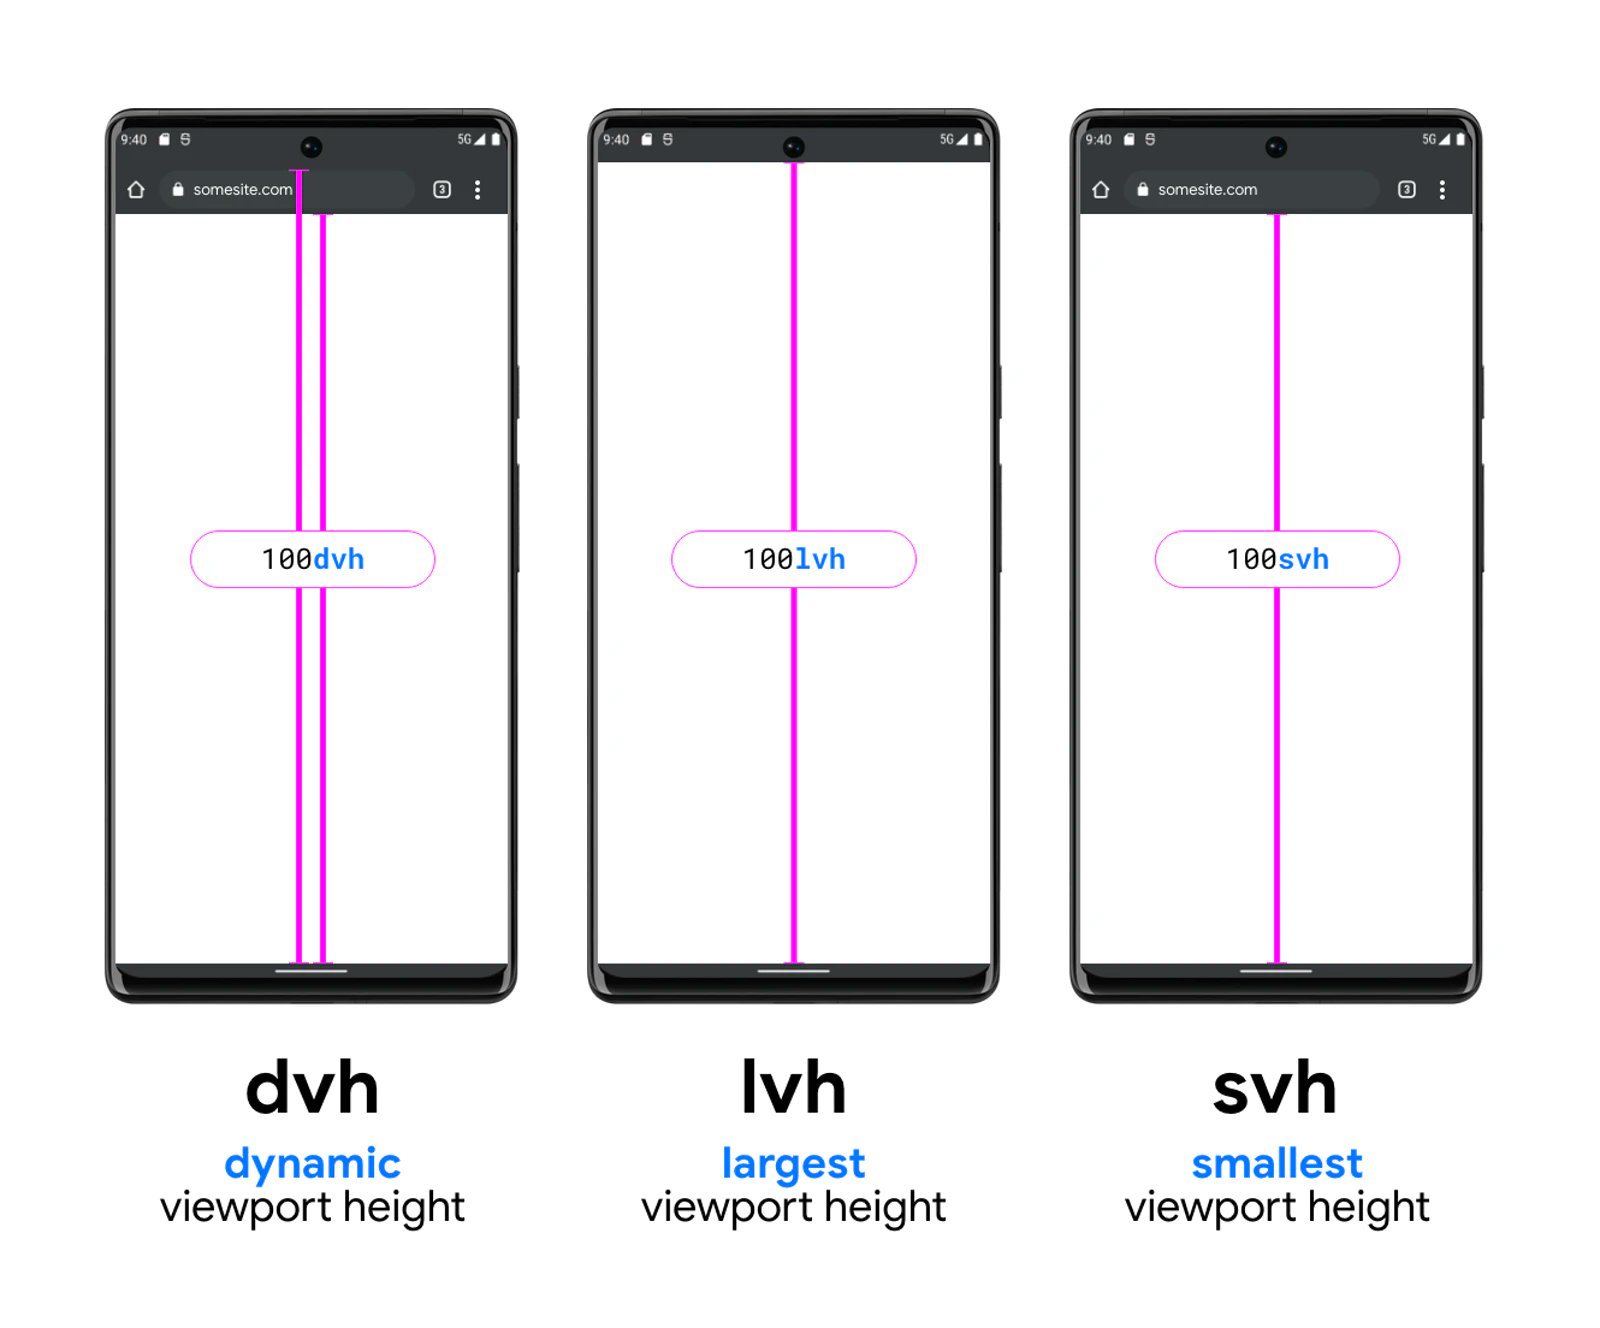 svh lvh dvh on Android